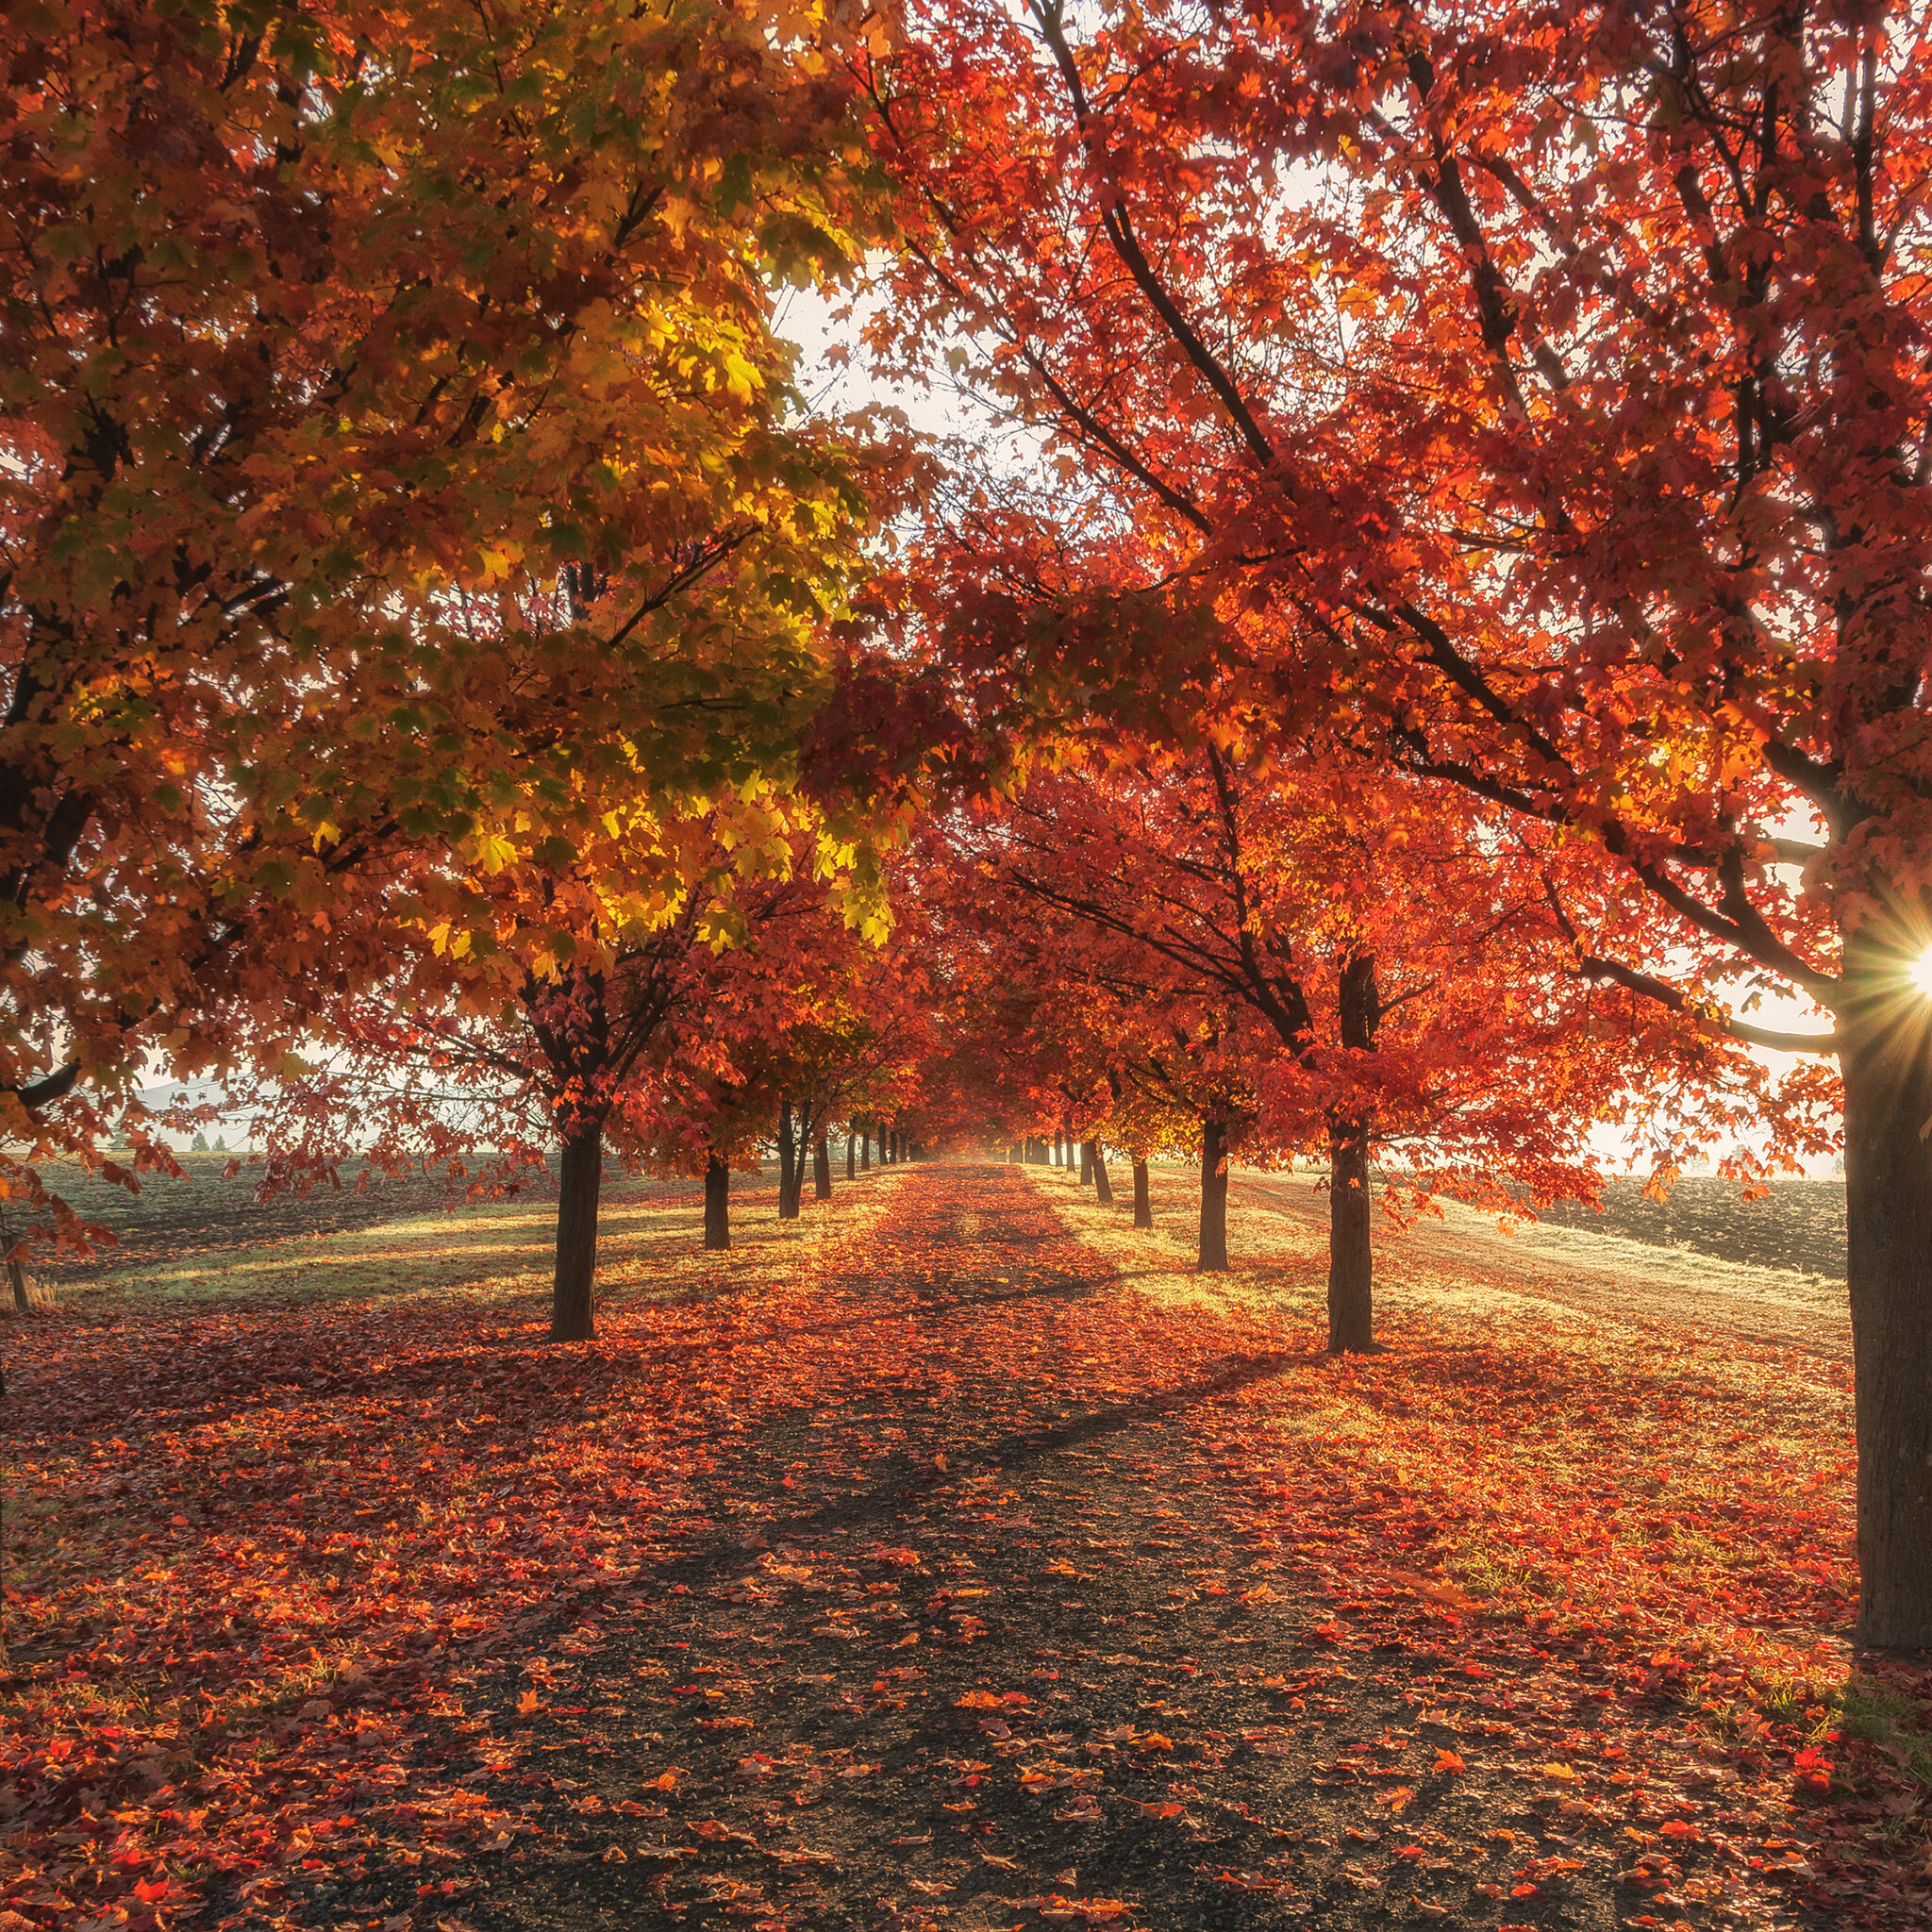 Buy Avikalp Exclusive Awi3274 Beautiful Road Falling Leaves Autumn Colorful  Trees Nature Scenery Full HD Wallpapers 182cm x 152cm Online at Low  Prices in India  Amazonin